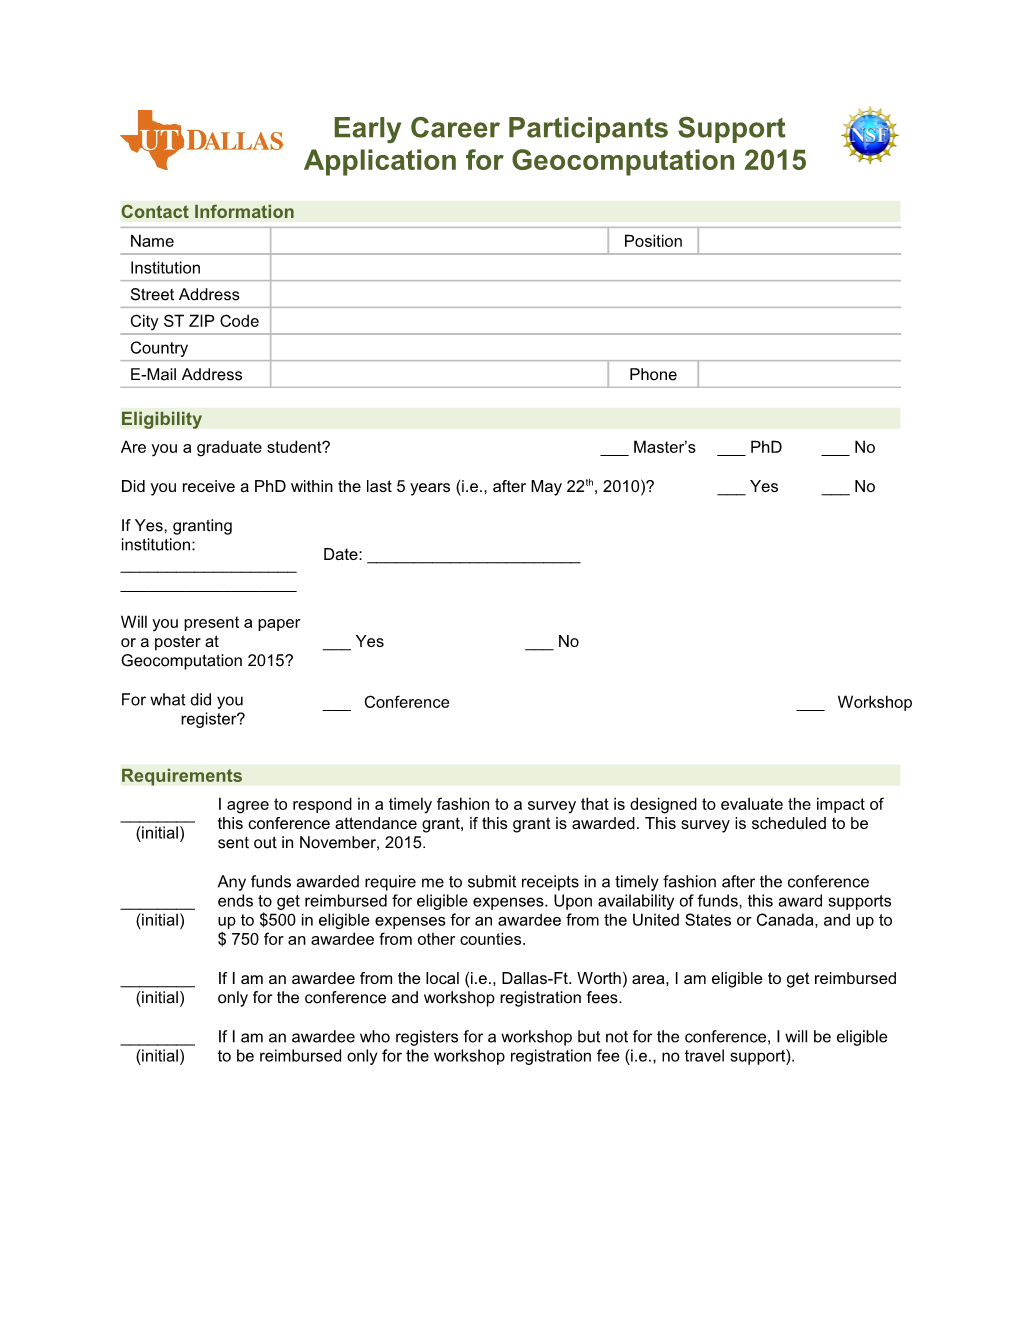 Early Career Participants Support Application for Geocomputation 2015